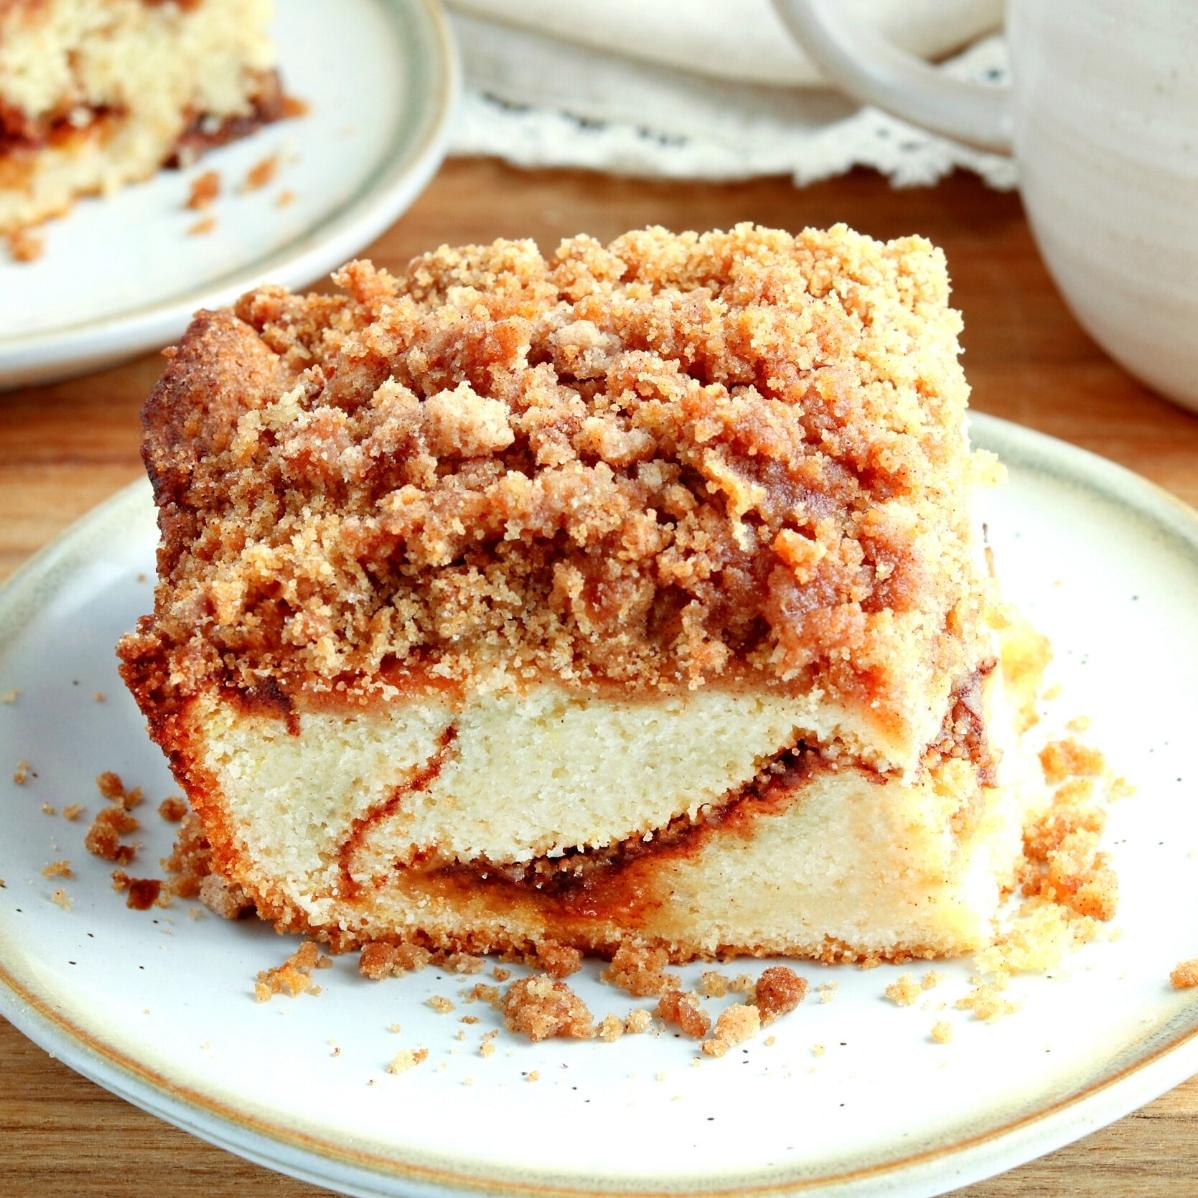  No gluten, no problem! This coffee cake recipe will make gluten-free eaters very happy.